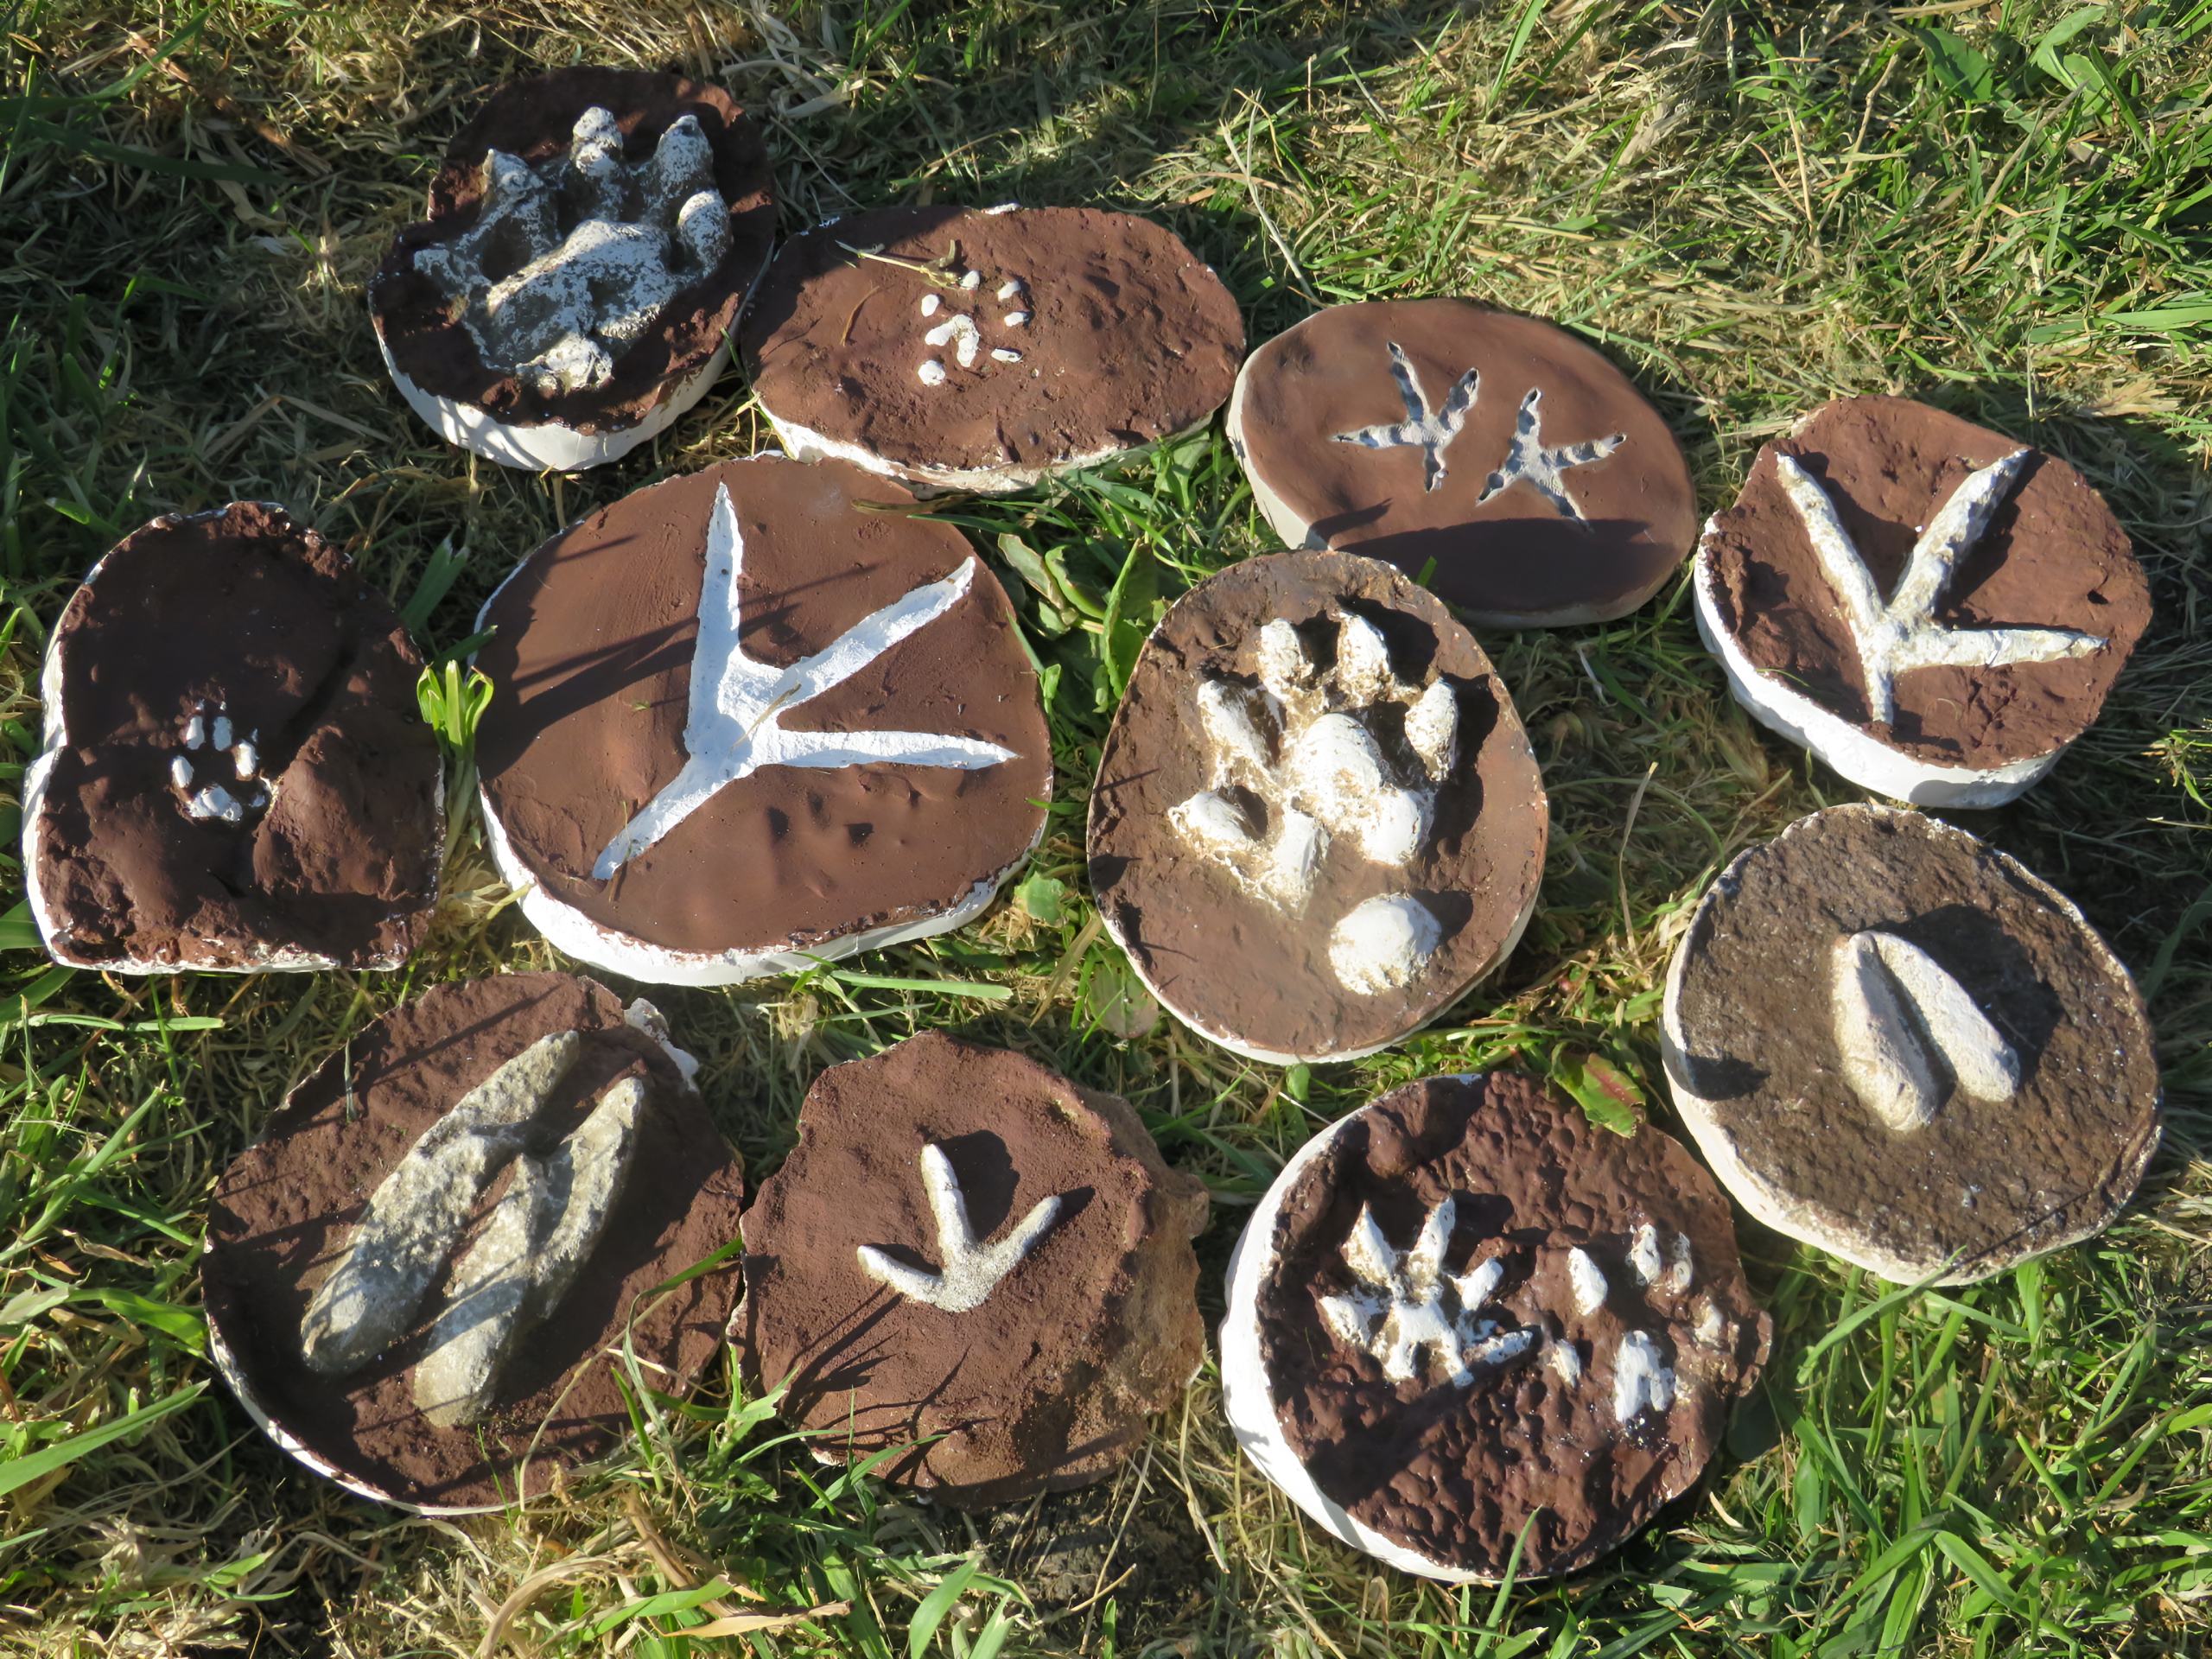 Items made during a Woodland School activity session on the Swinton Estate